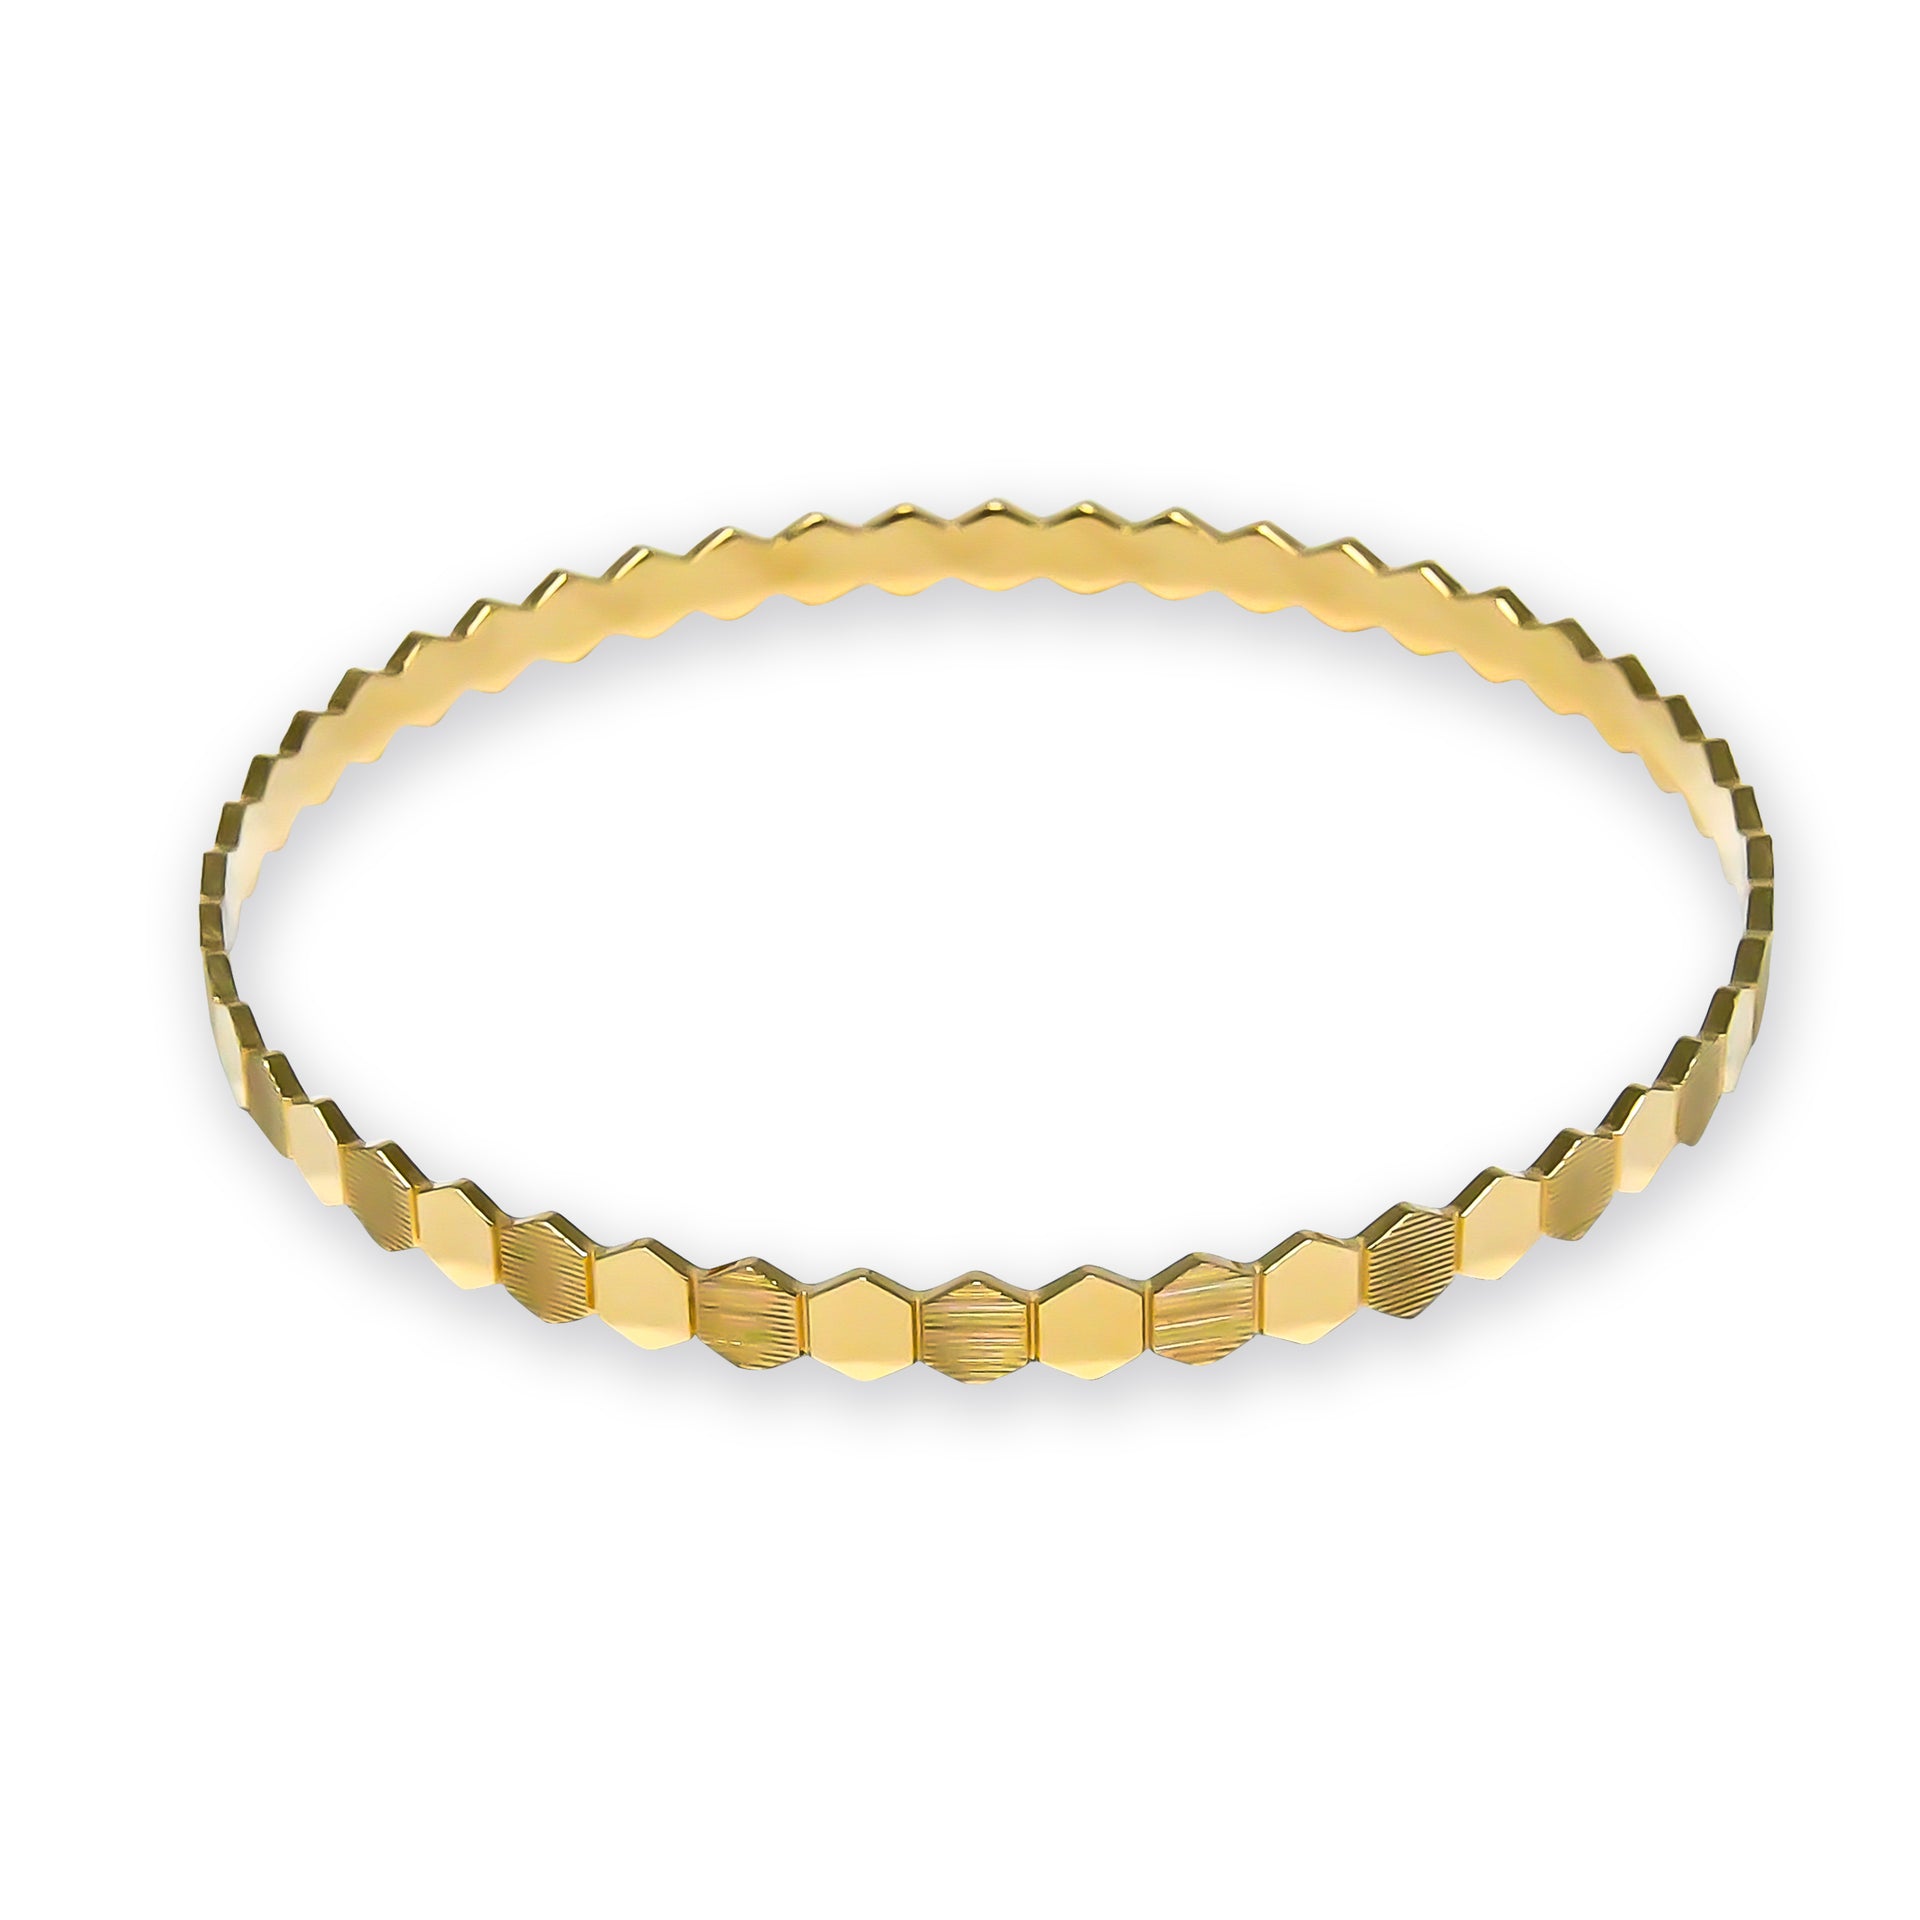 Bangle EARTH IS ROUND 5mm hexagon pattern yellow gold 18k 750